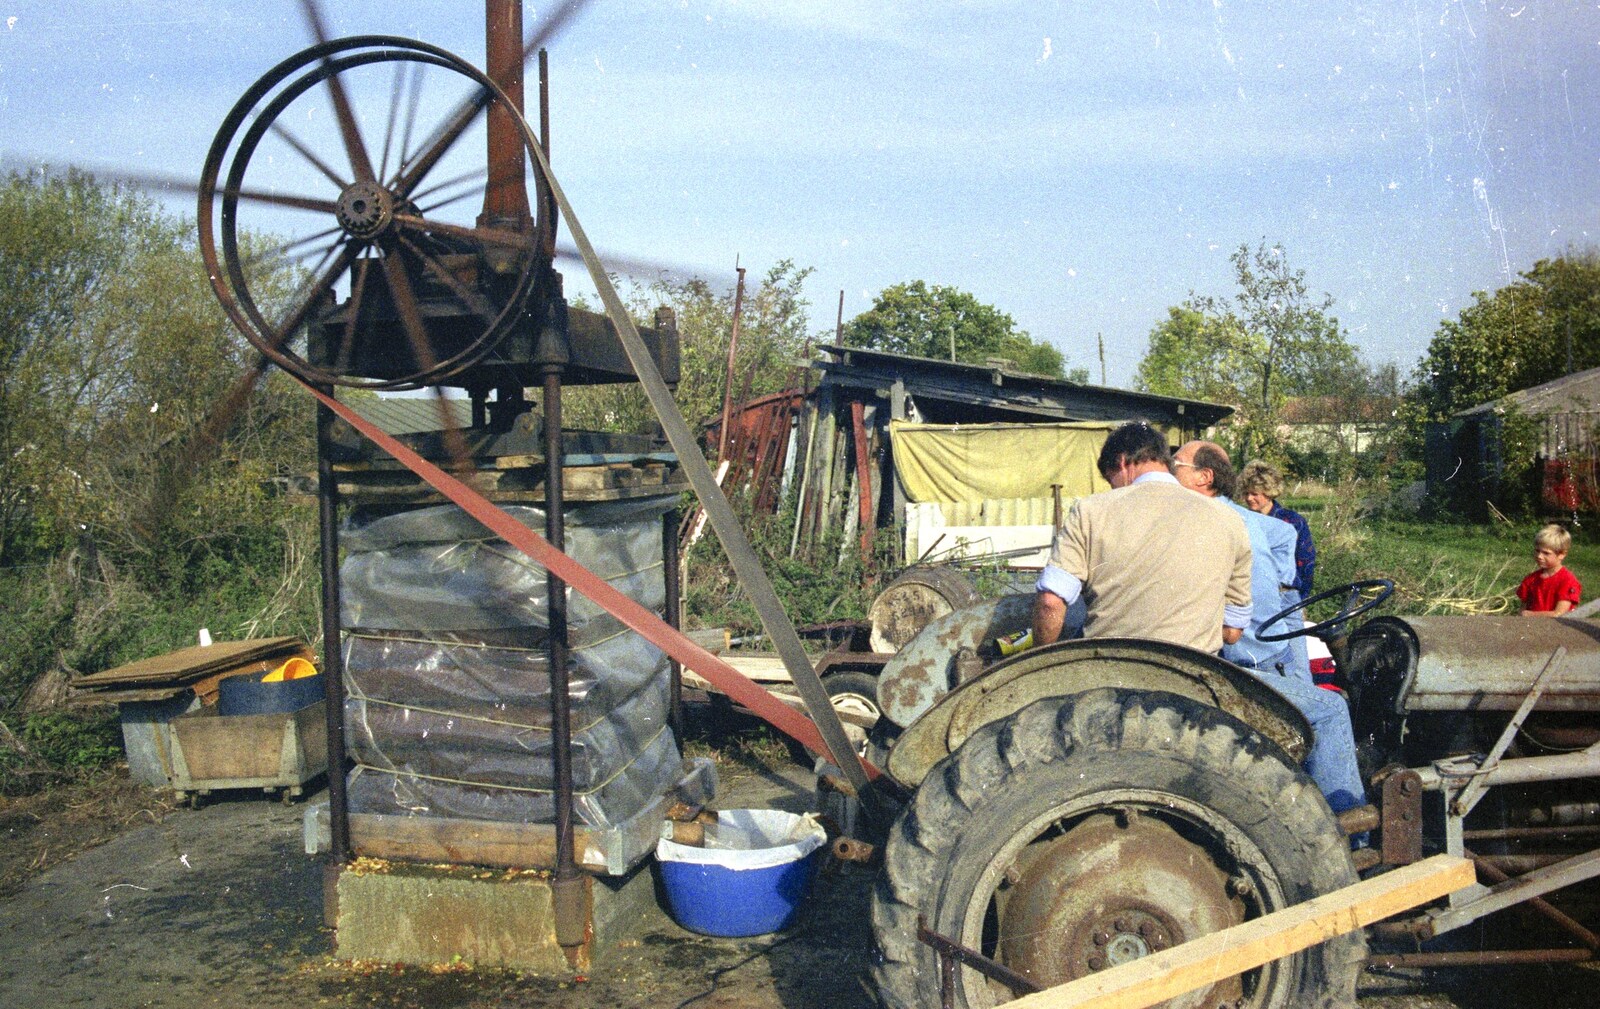 Geoff spins up Winnie and drives the press from The Annual Cider Making Event, Stuston, Suffolk - 11th October 1990